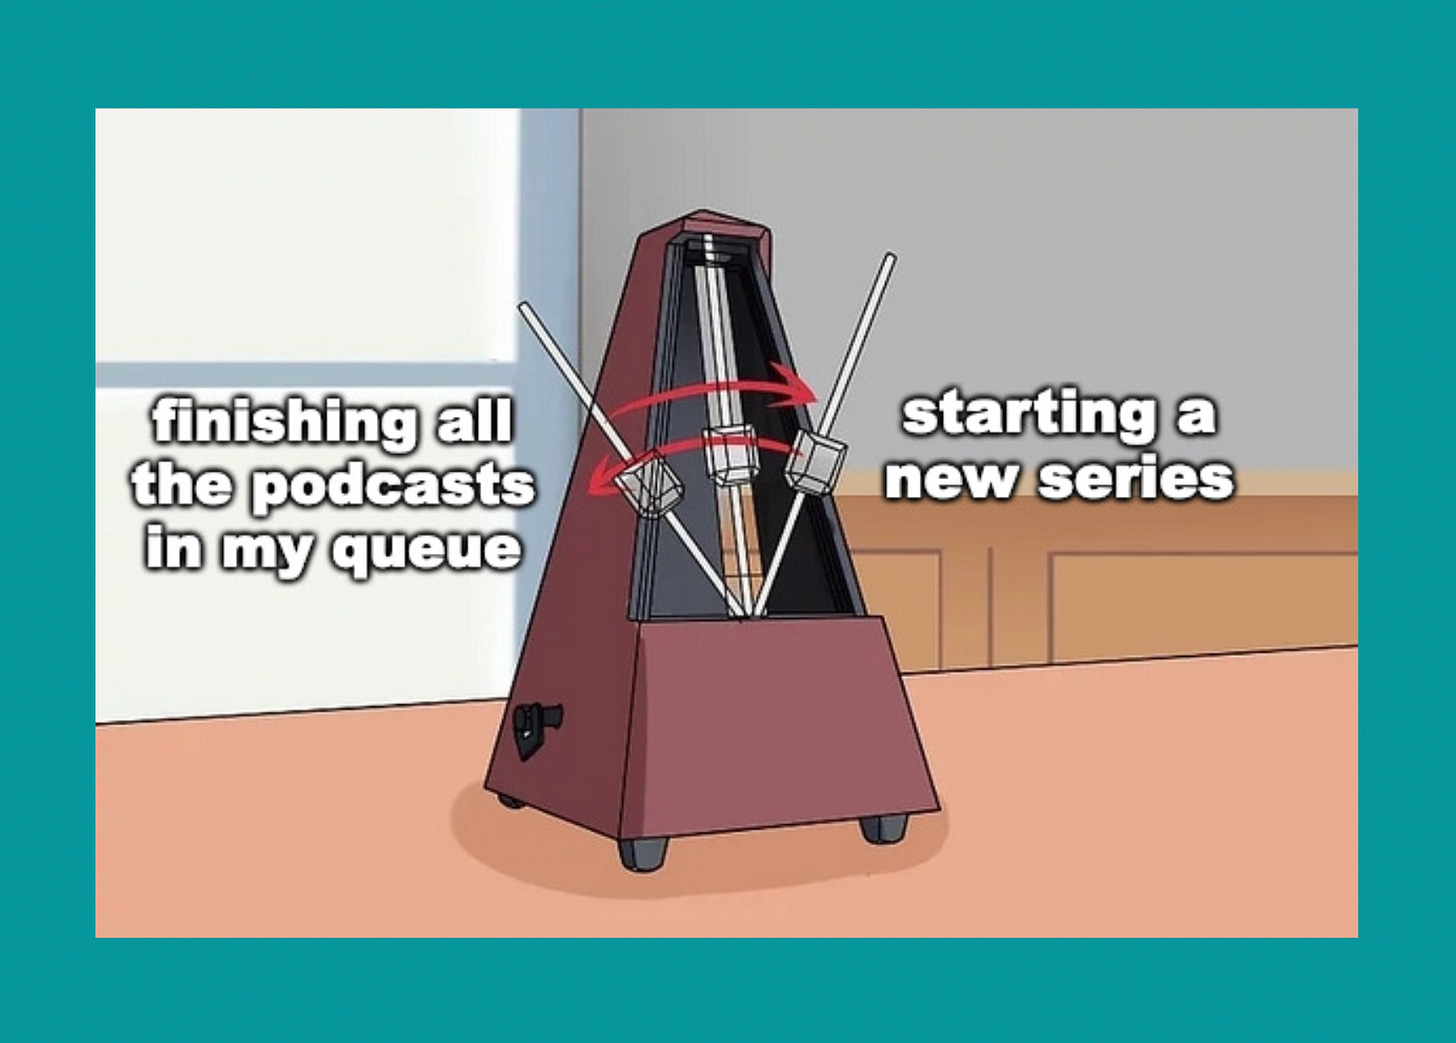 Metronome with "finishing all the podcasts in my queue" on one side and "starting a new series" on the other side.